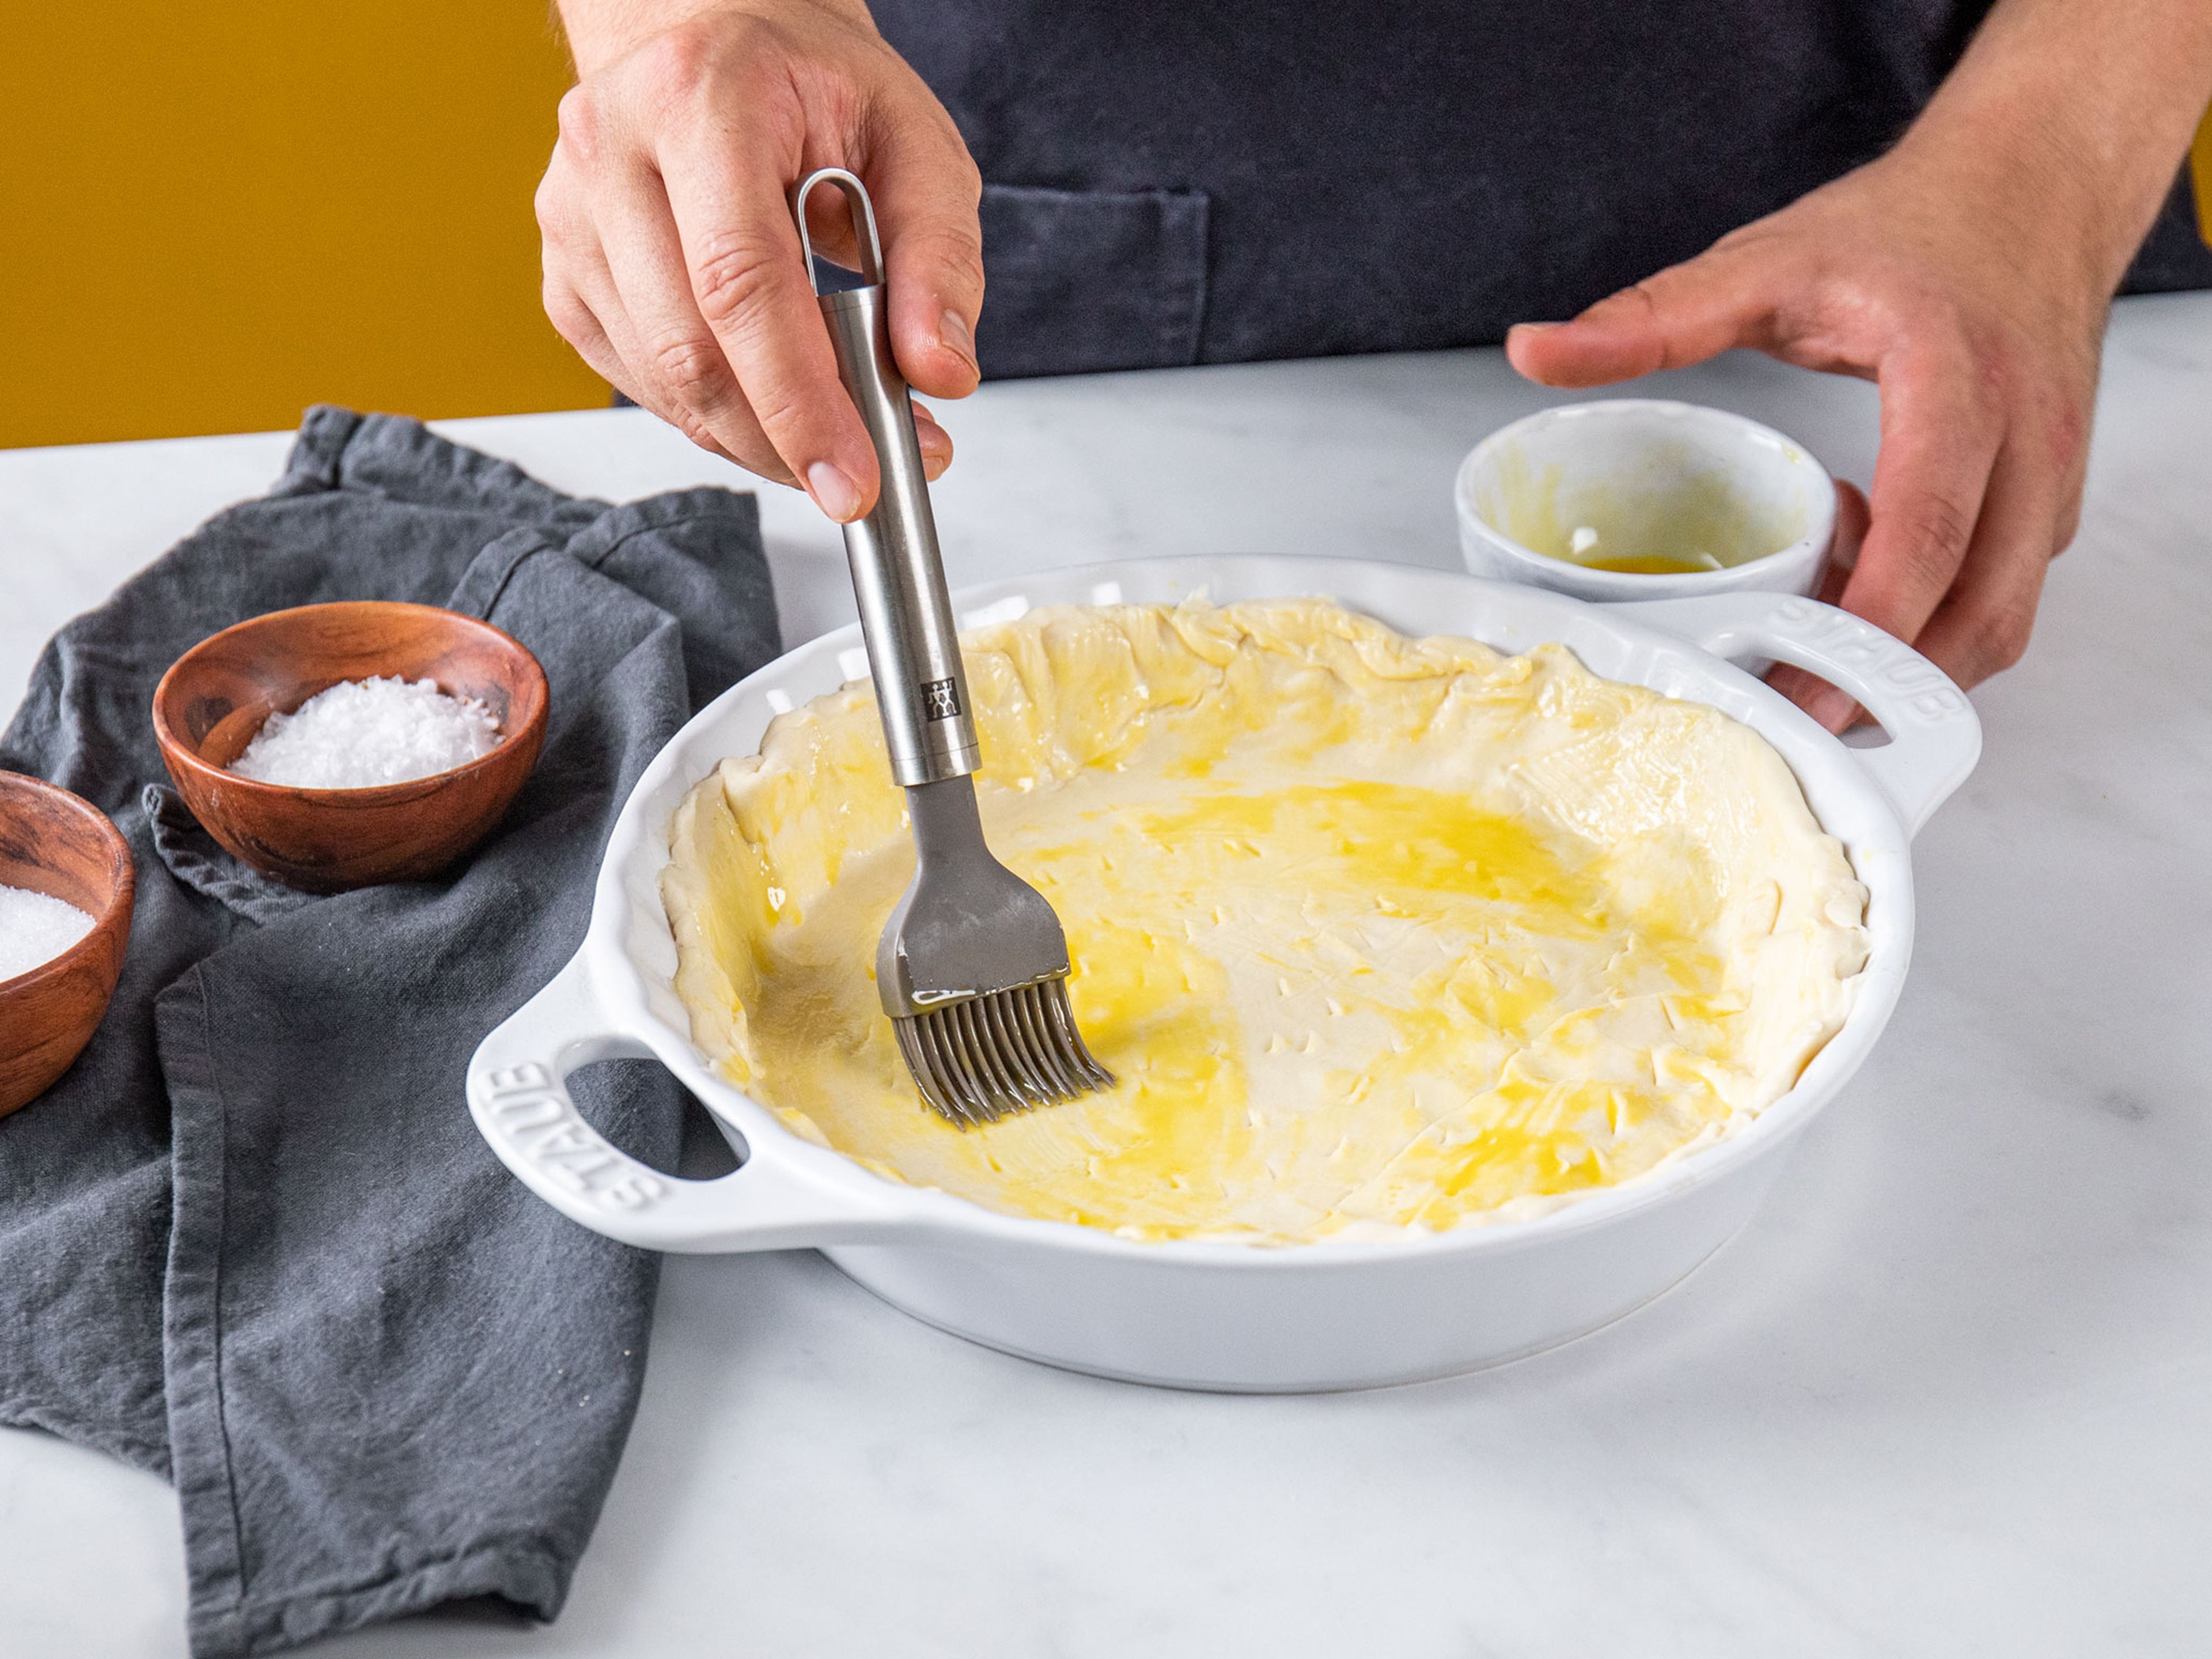 Line a pie dish with the puff pastry and prick all over with a fork. Beat the egg yolk and coat the puff pastry with it. Bake at 200°C/390°F for approx. 10 min.